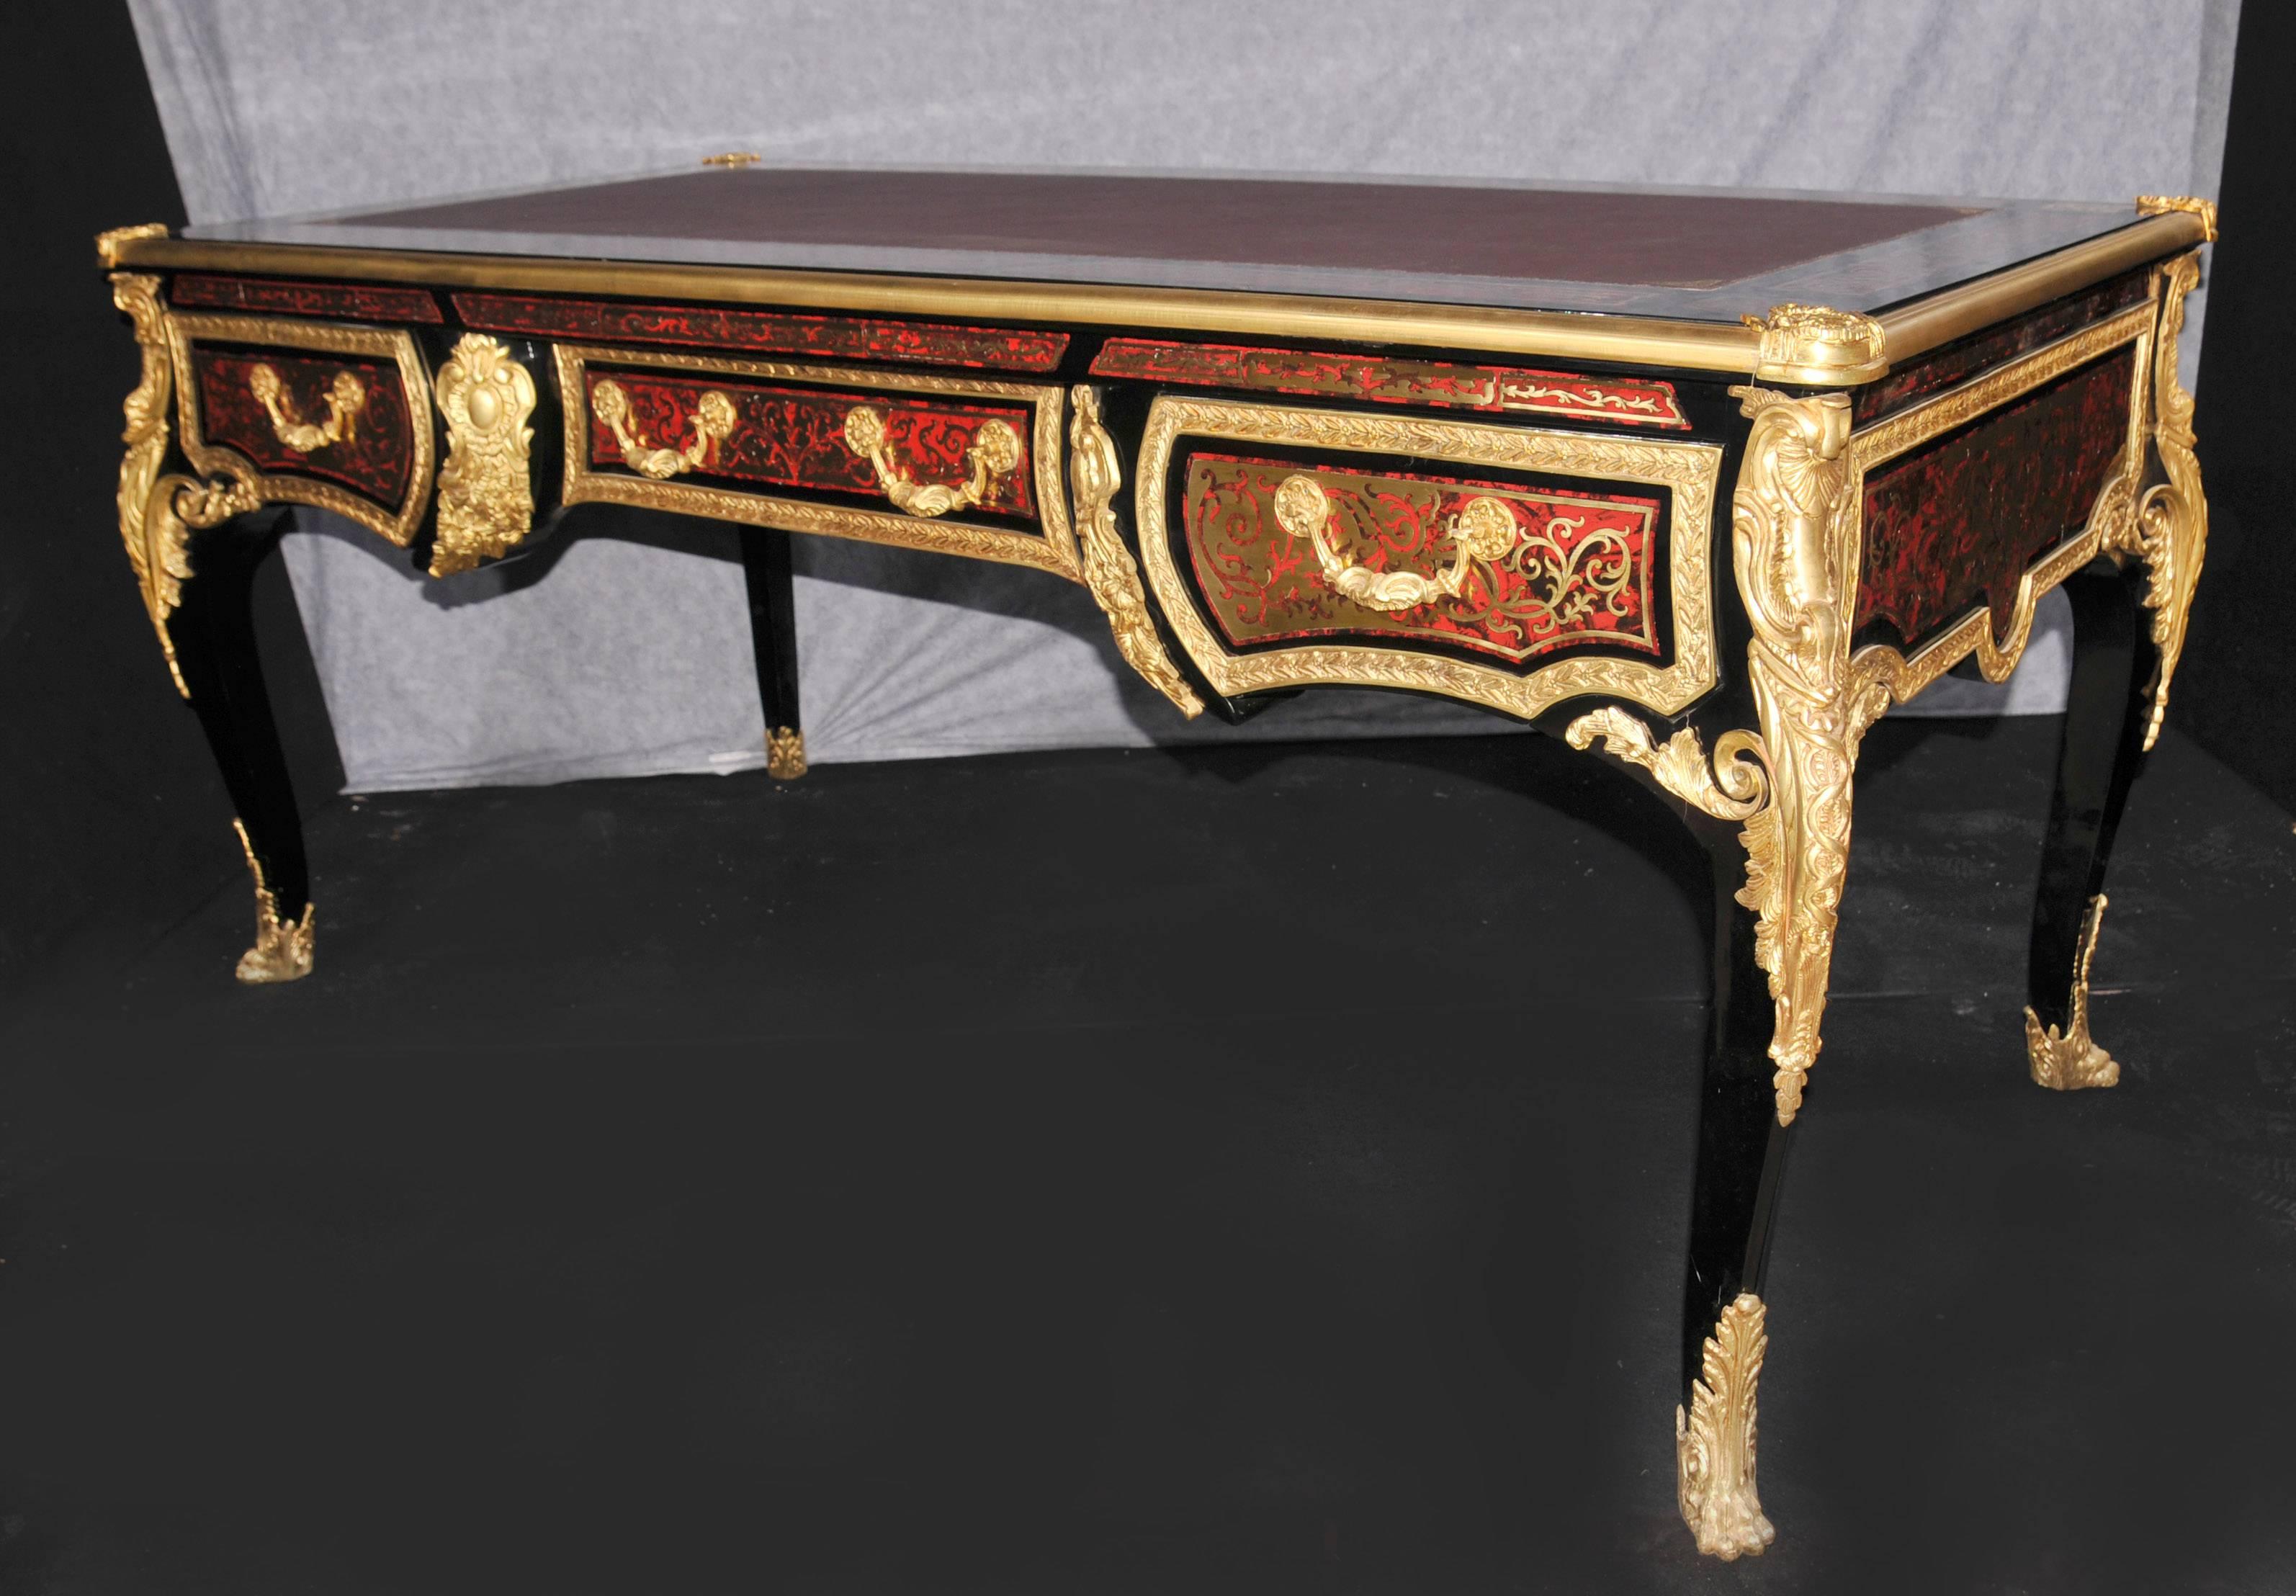 Large Boulle Louis XVI Desk Writing Table Bureau Plat Marquetry Inlay In Good Condition For Sale In Potters Bar, Herts